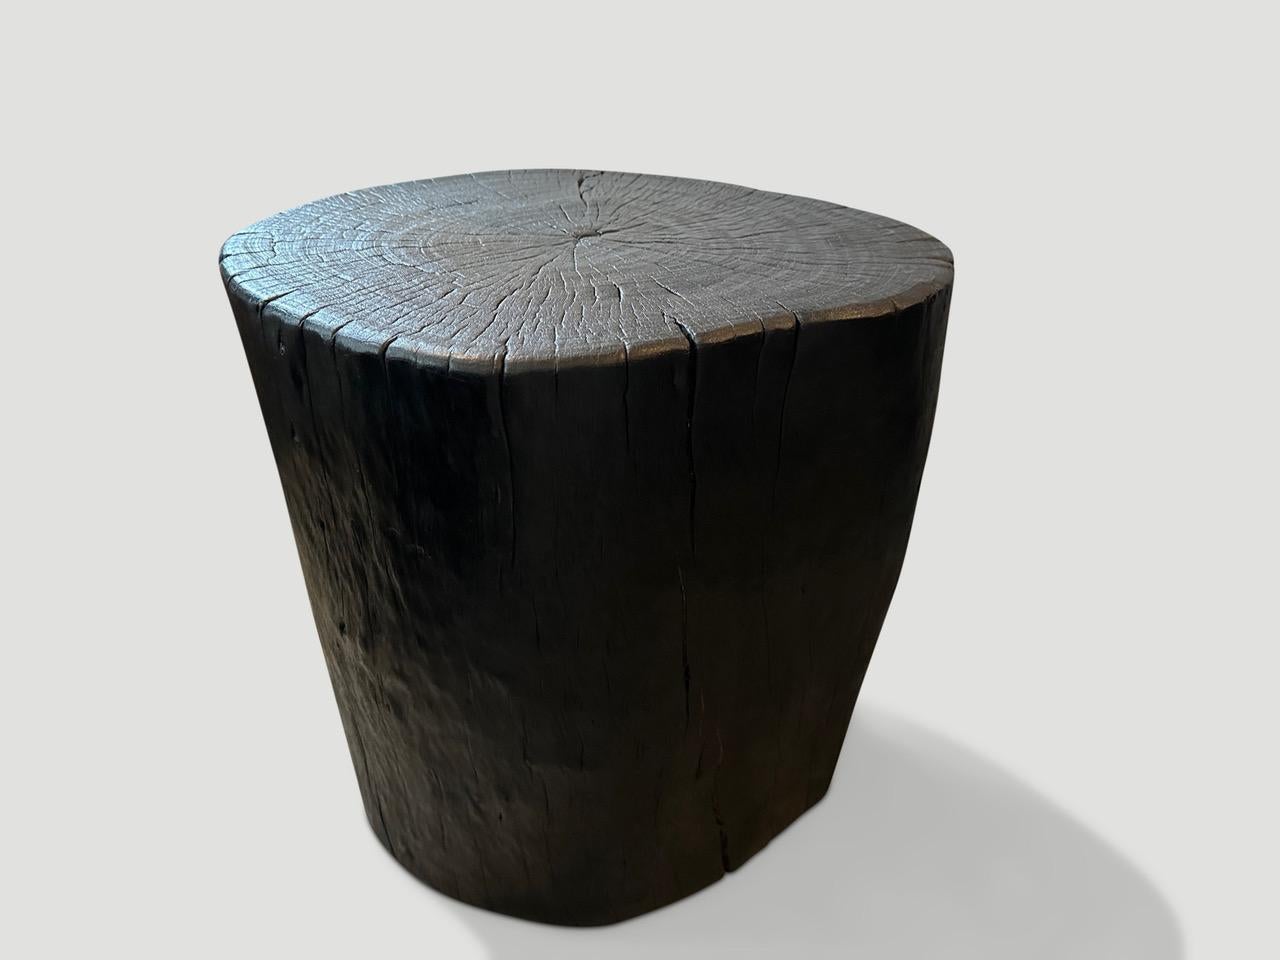 Reclaimed lychee wood side table. Charred, sanded and sealed whilst respecting the natural organic shape and revealing the beautiful wood grain. 

The Triple Burnt Collection represents a unique line of modern furniture made from solid reclaimed